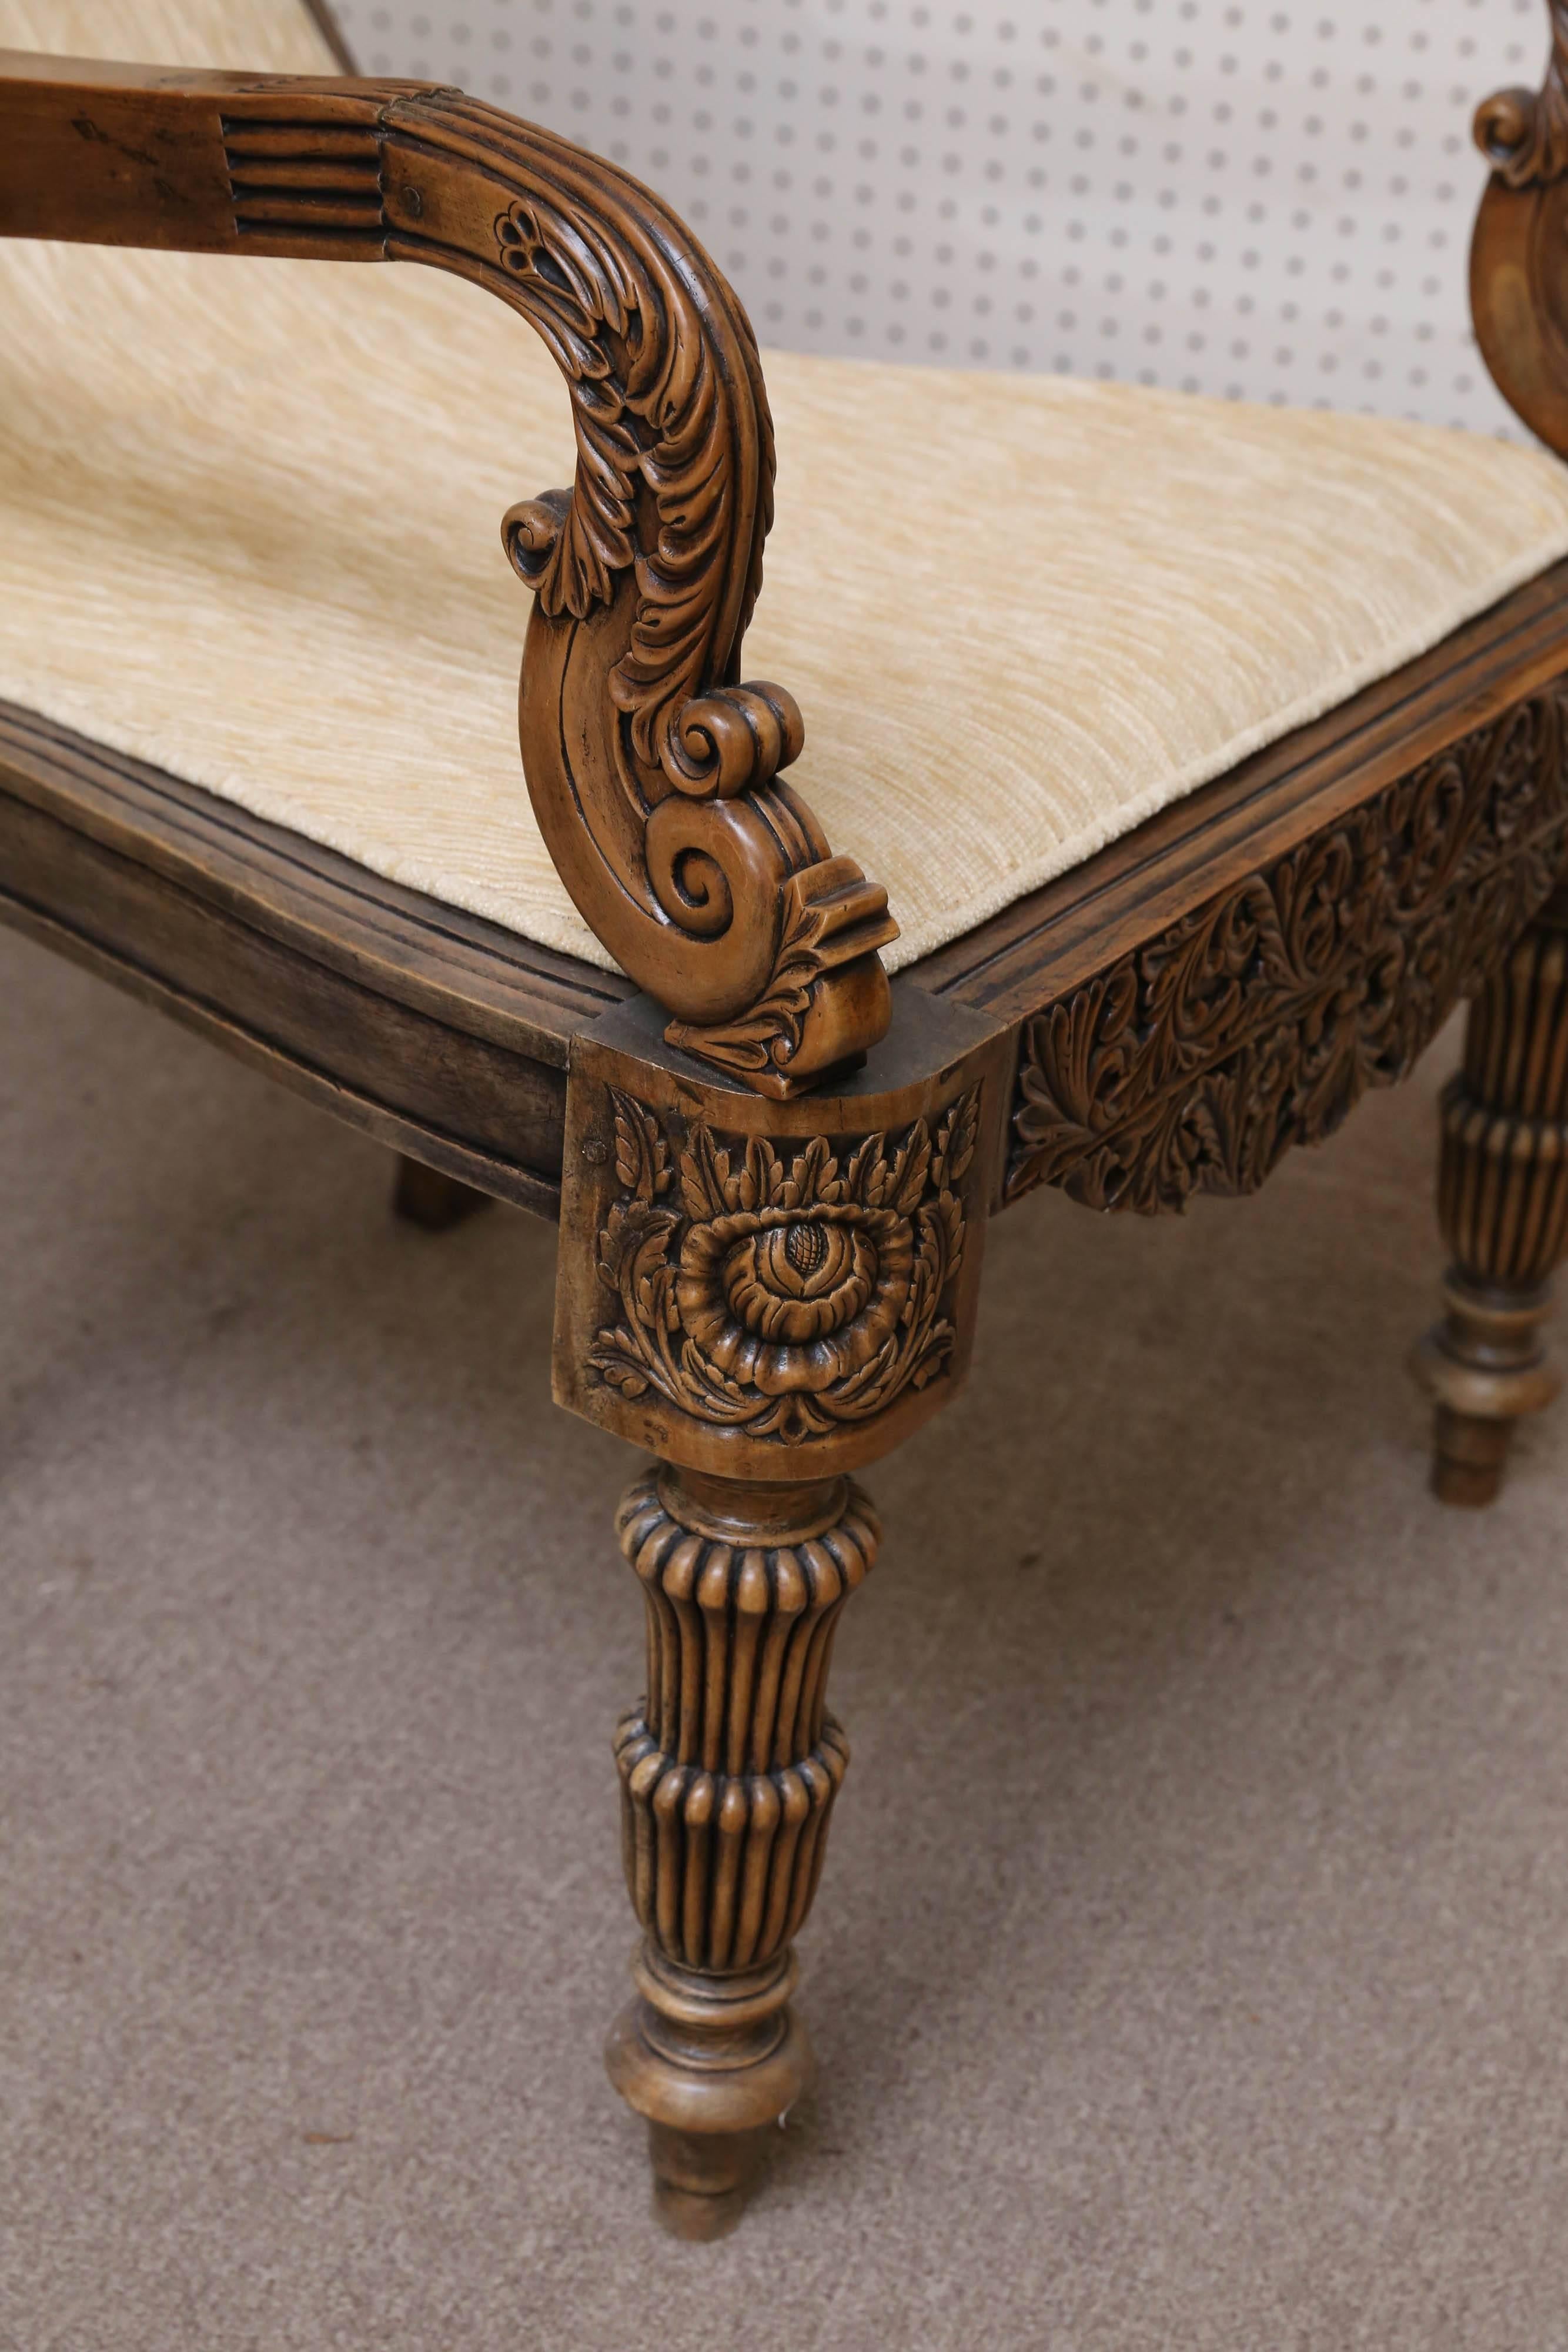 These satin wood plantation chairs were made on commission for Dutch settlers in Gallee district of Sri Lanka
Only very wealthy people could afford items made of satinwood. These easy chairs are superbly handcrafted with precise detailed carvings.